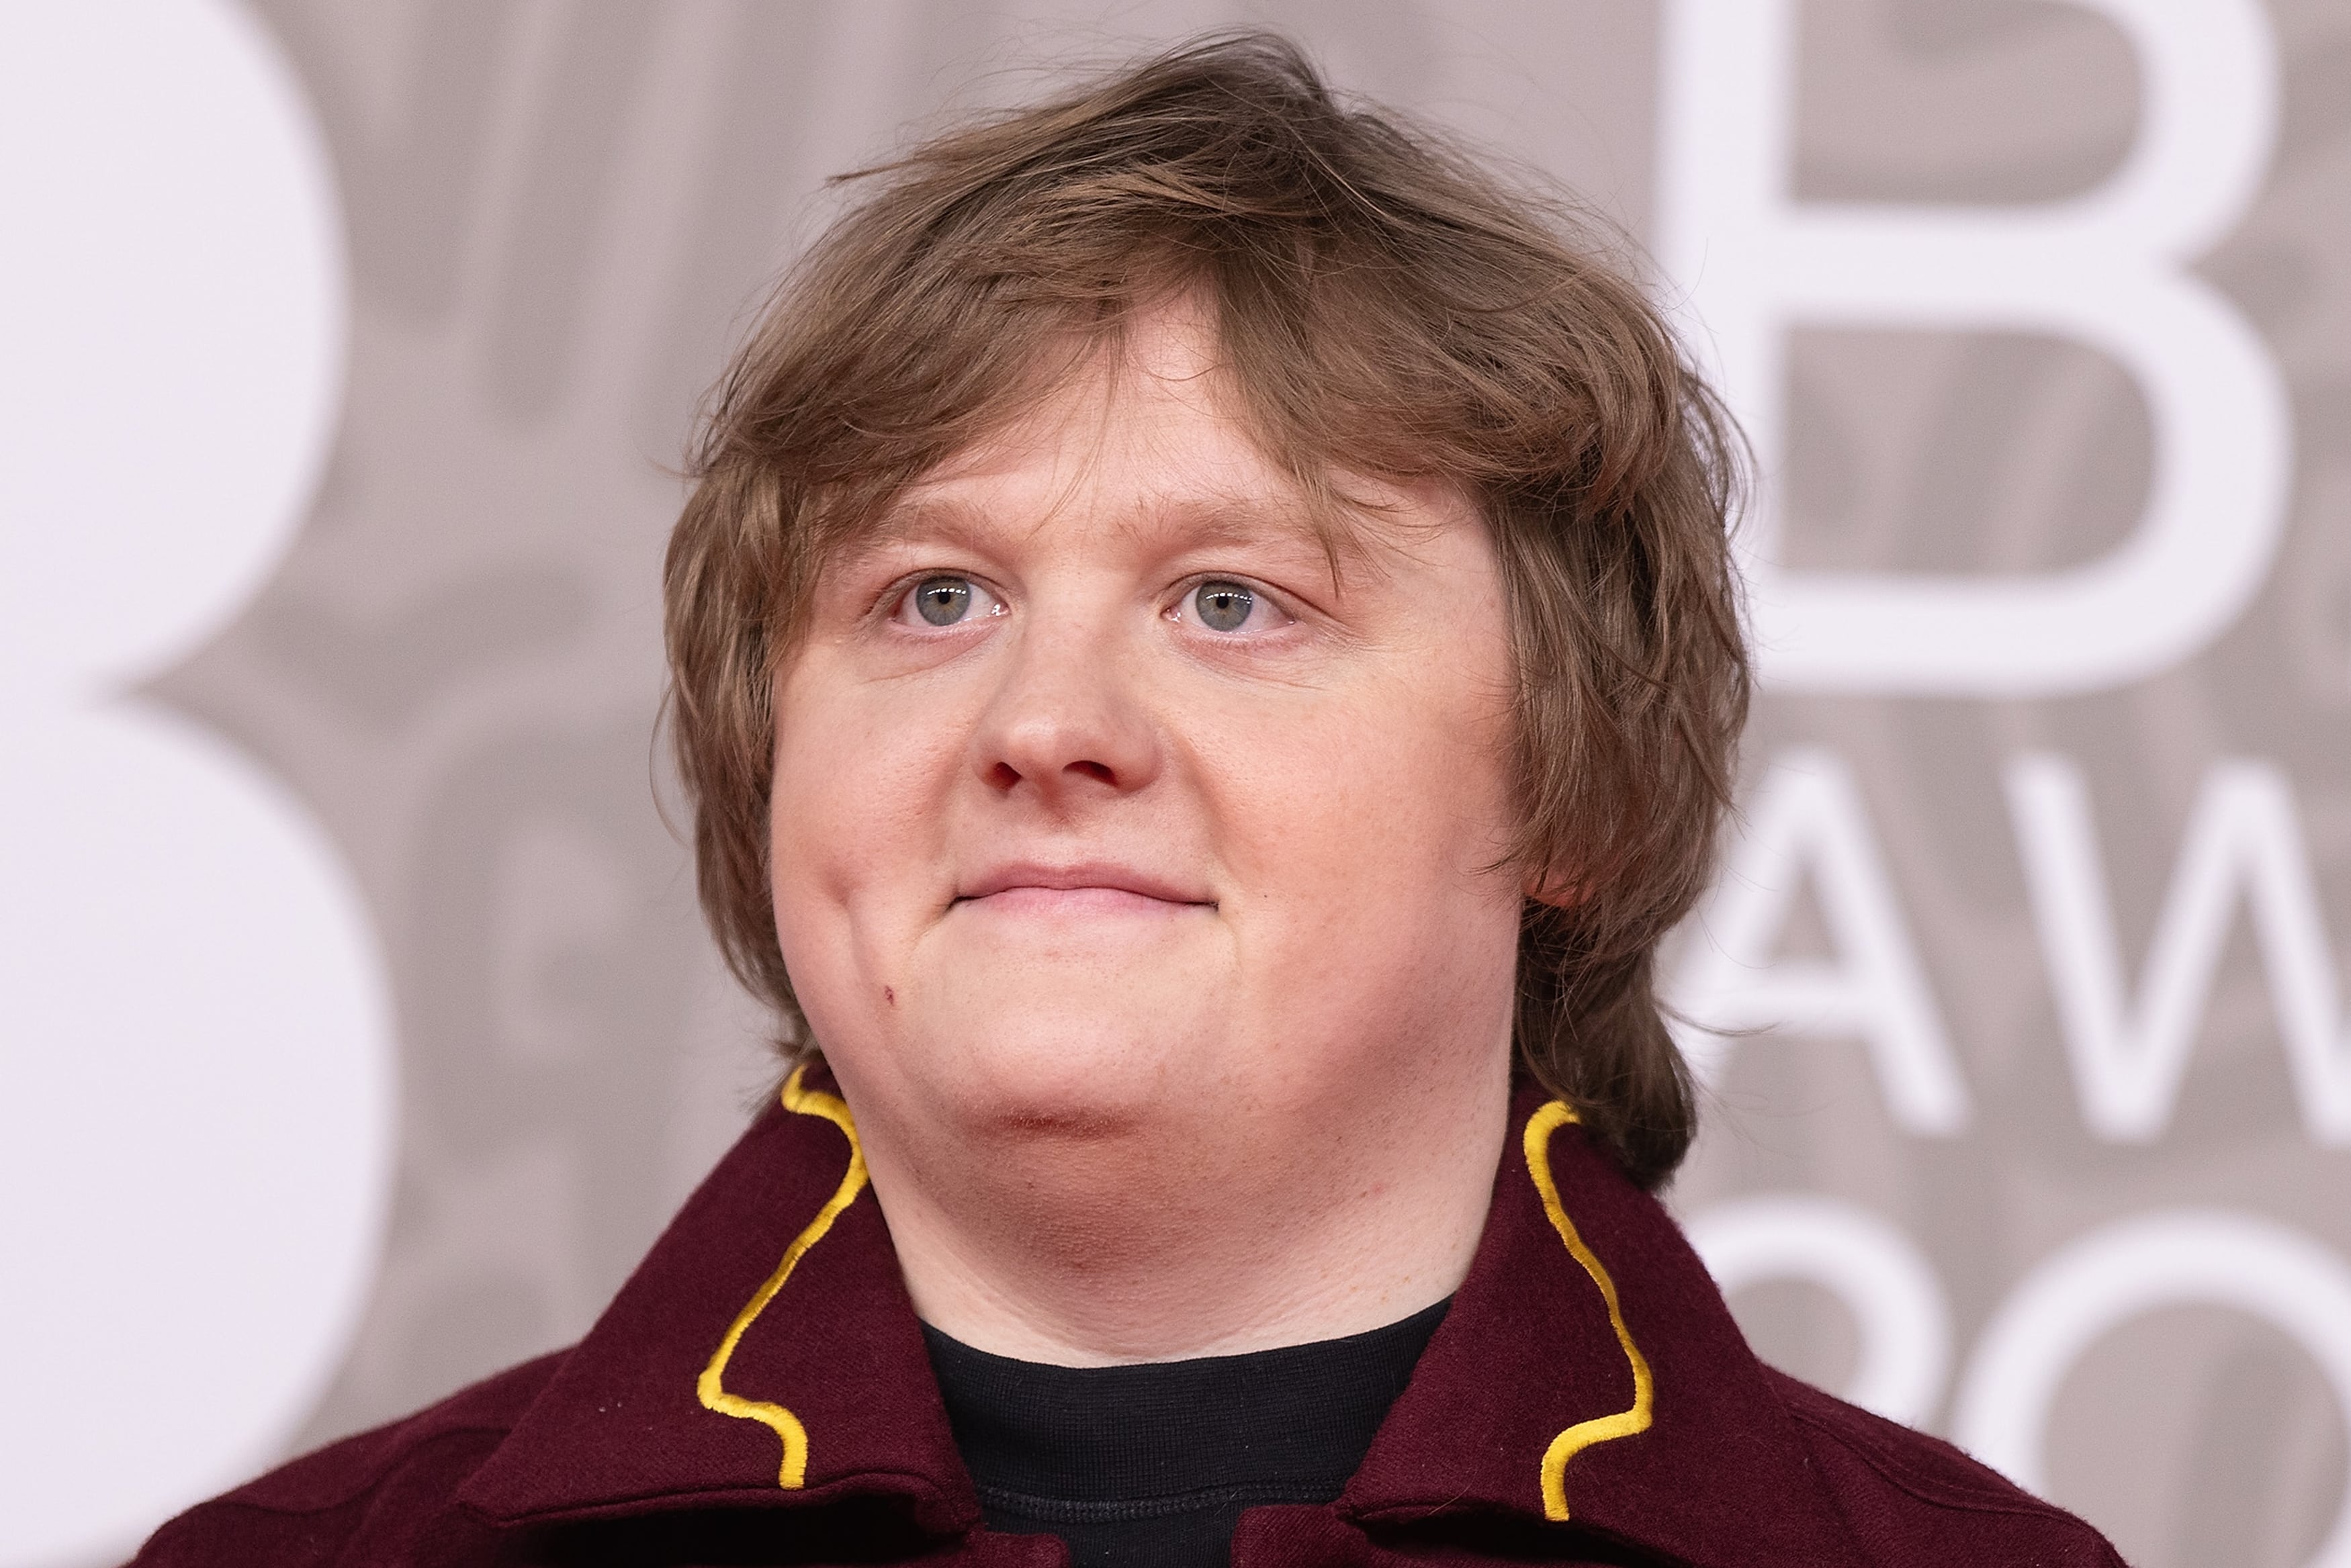 Lewis Capaldi reveals which A-list singer inspired his new single